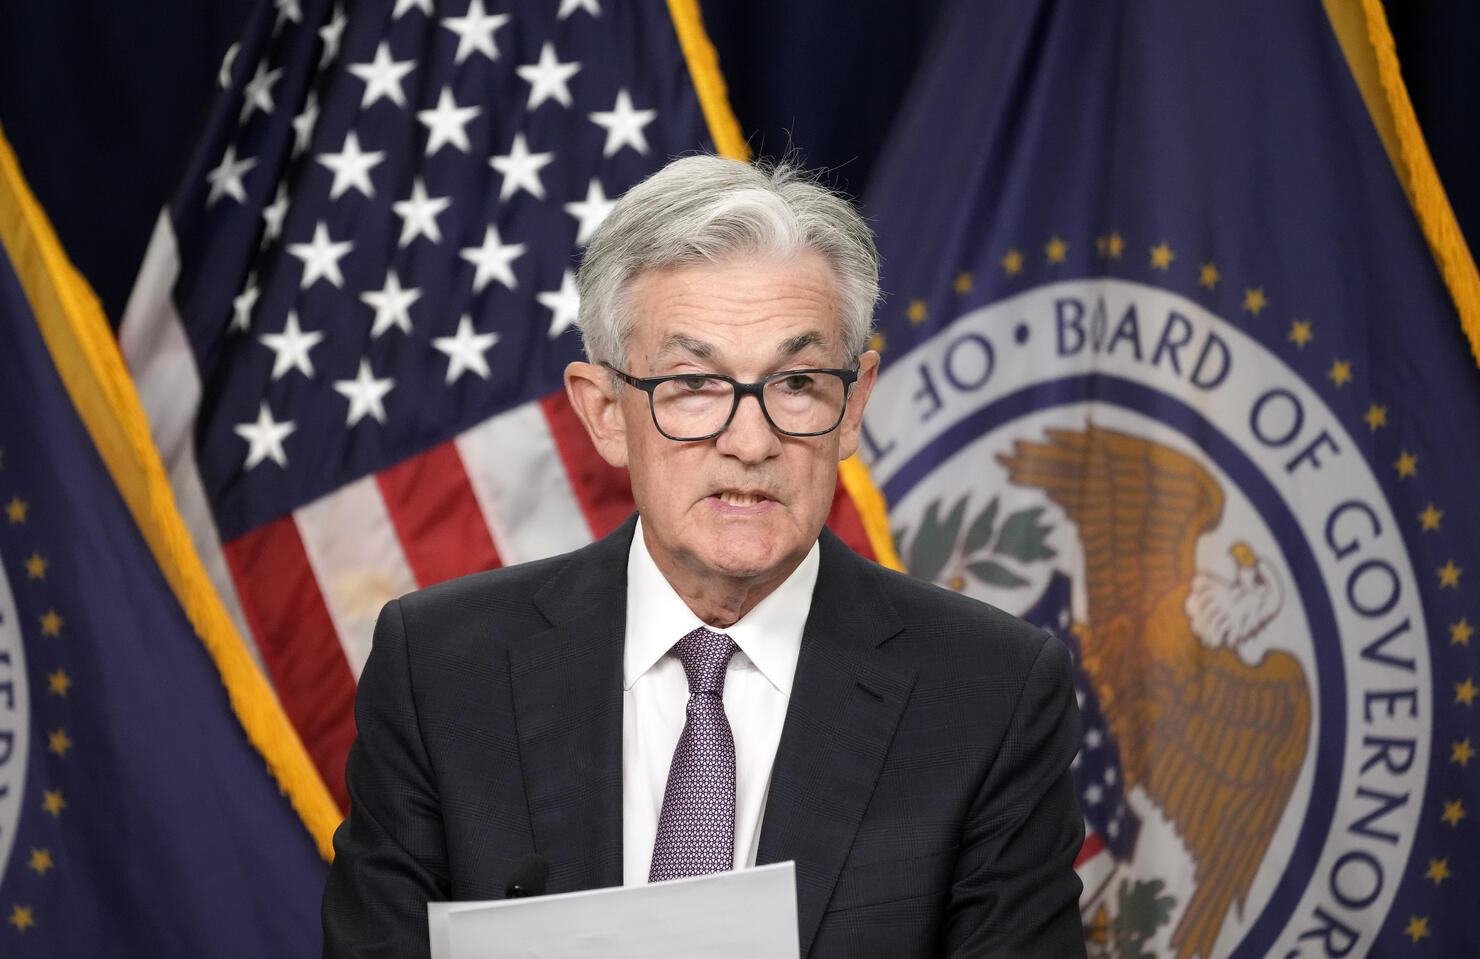 Federal Reserve Chair Powell Holds Press Conference On Interest Rate Announcement